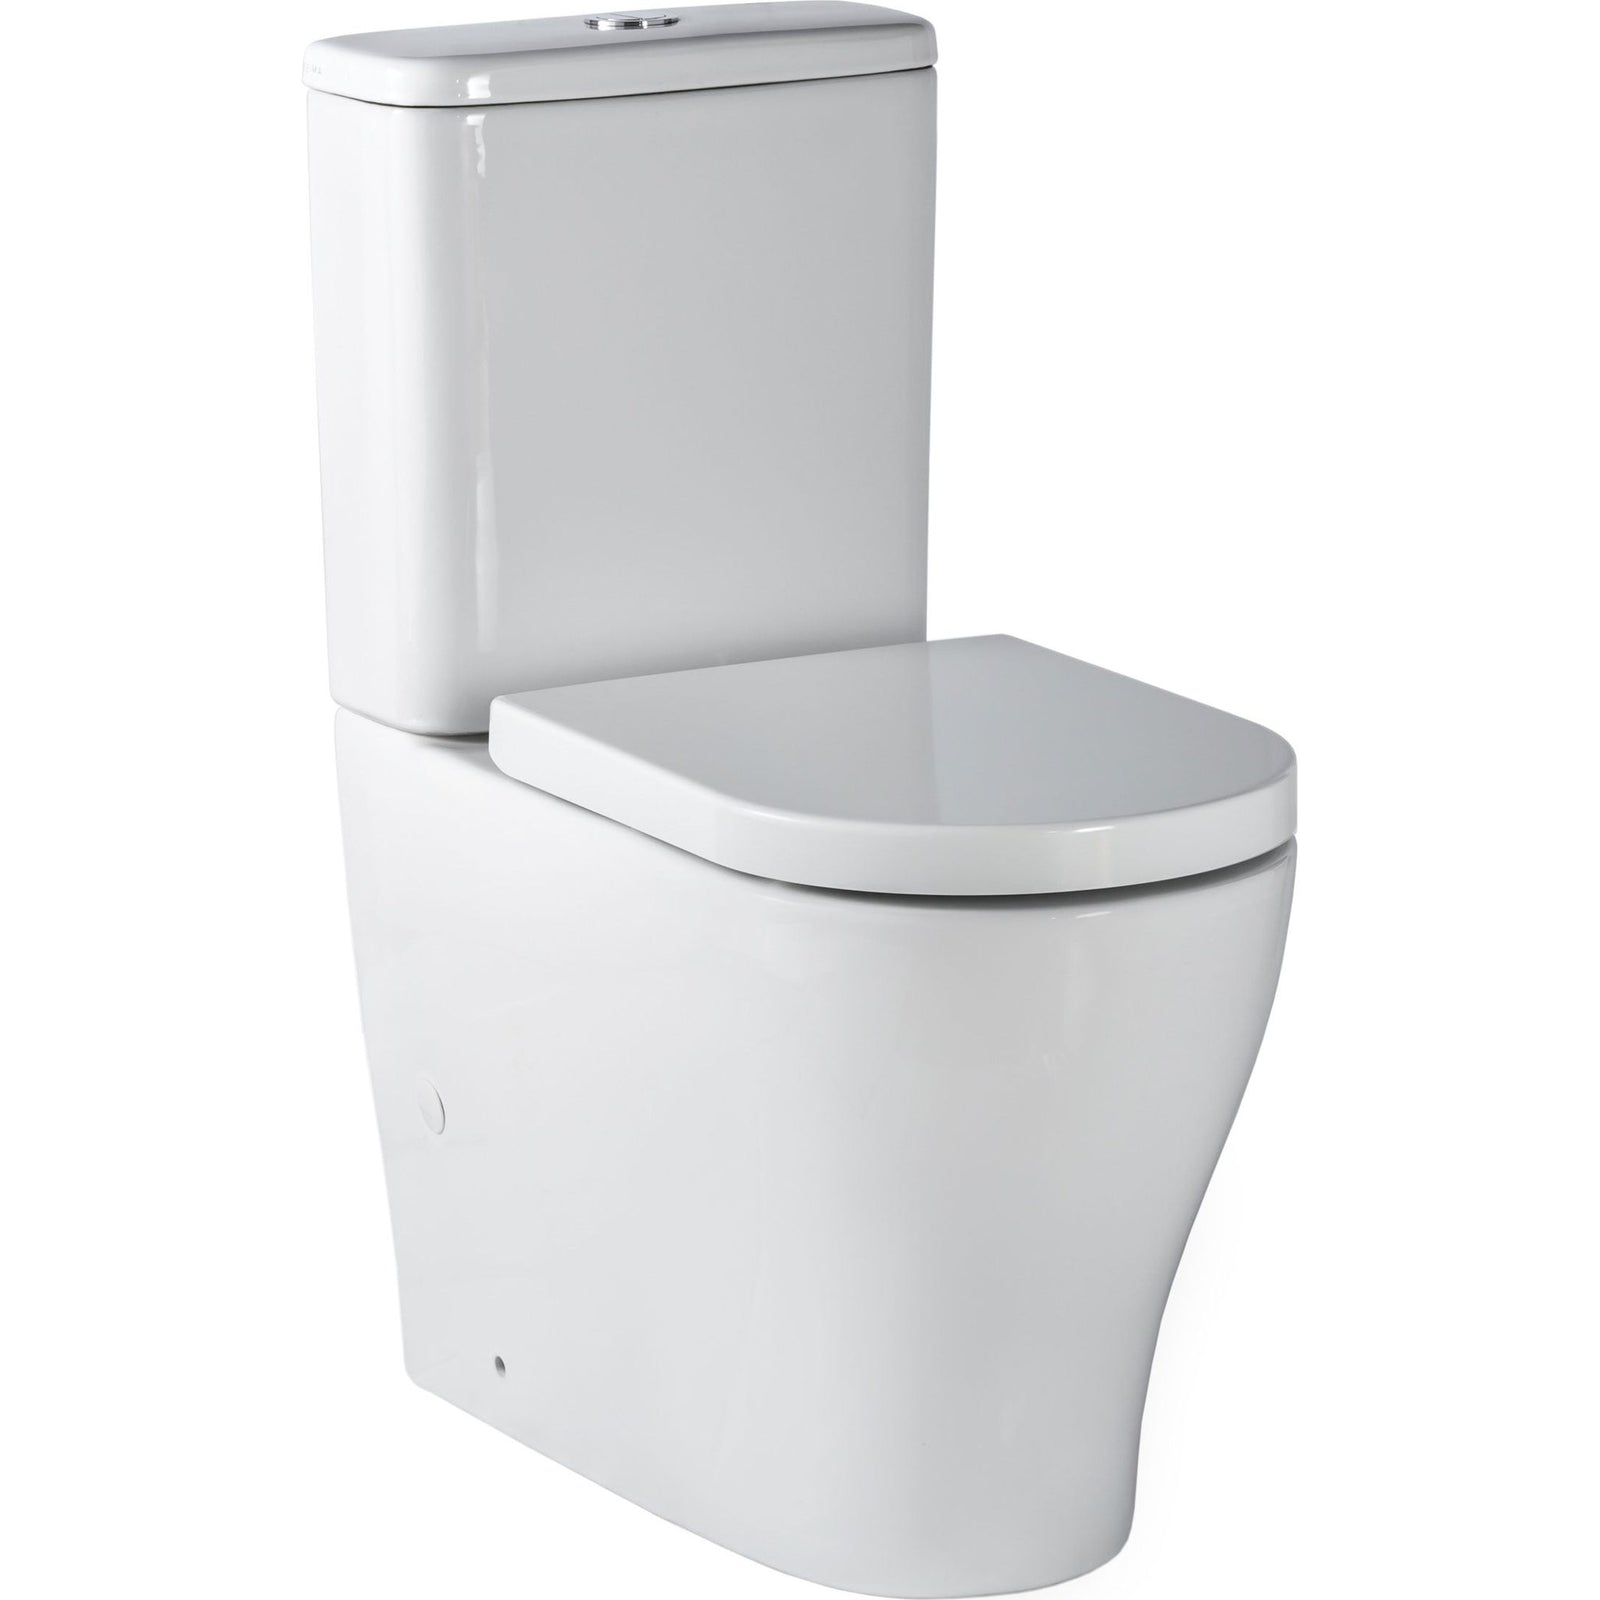 Limni Wall Faced Toilet Suite